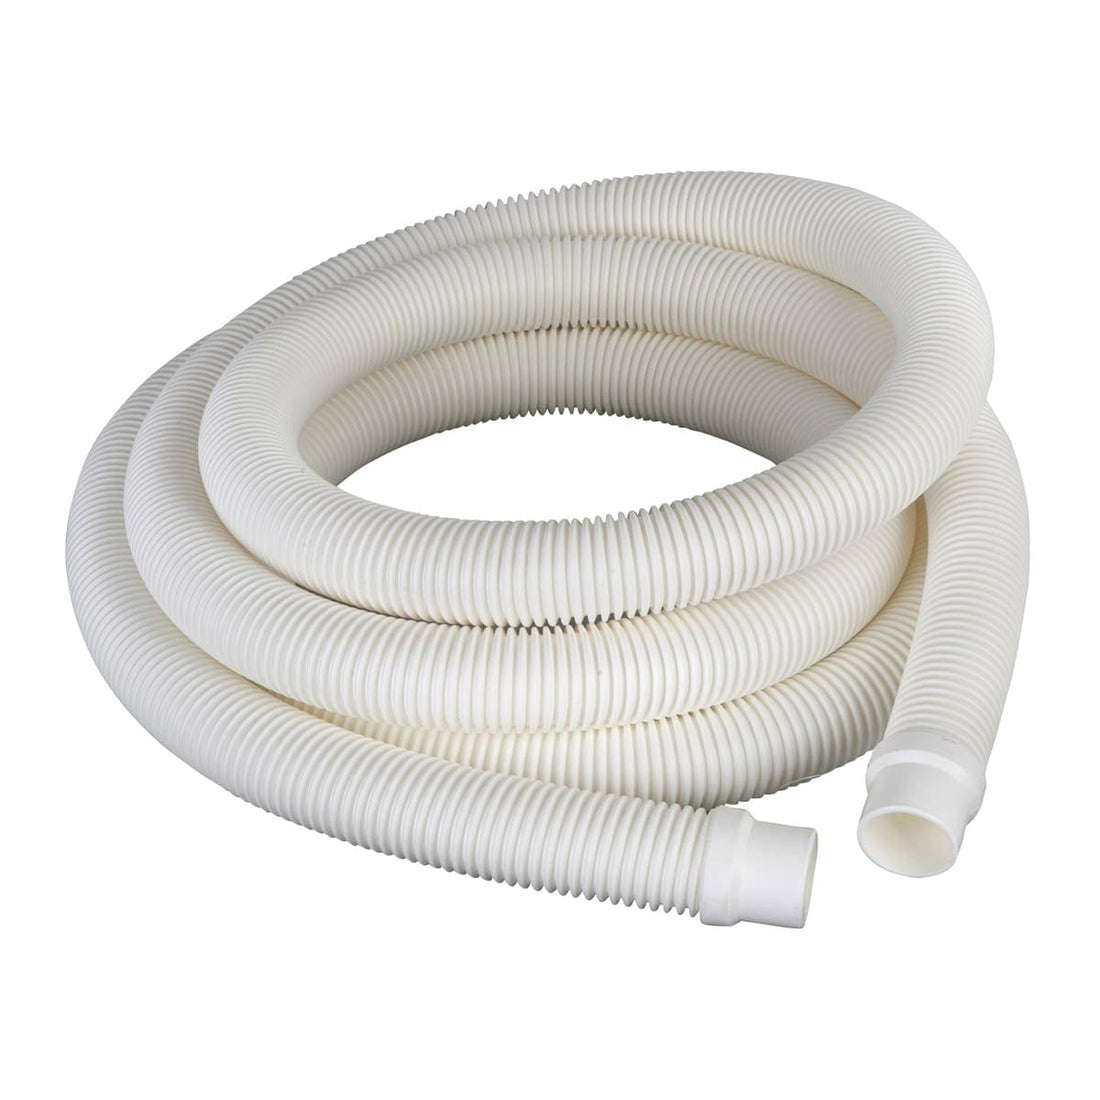 WHITE POOL FILTER HOSE 4M TWO ENDS 38MM - best price from Maltashopper.com BR500011044